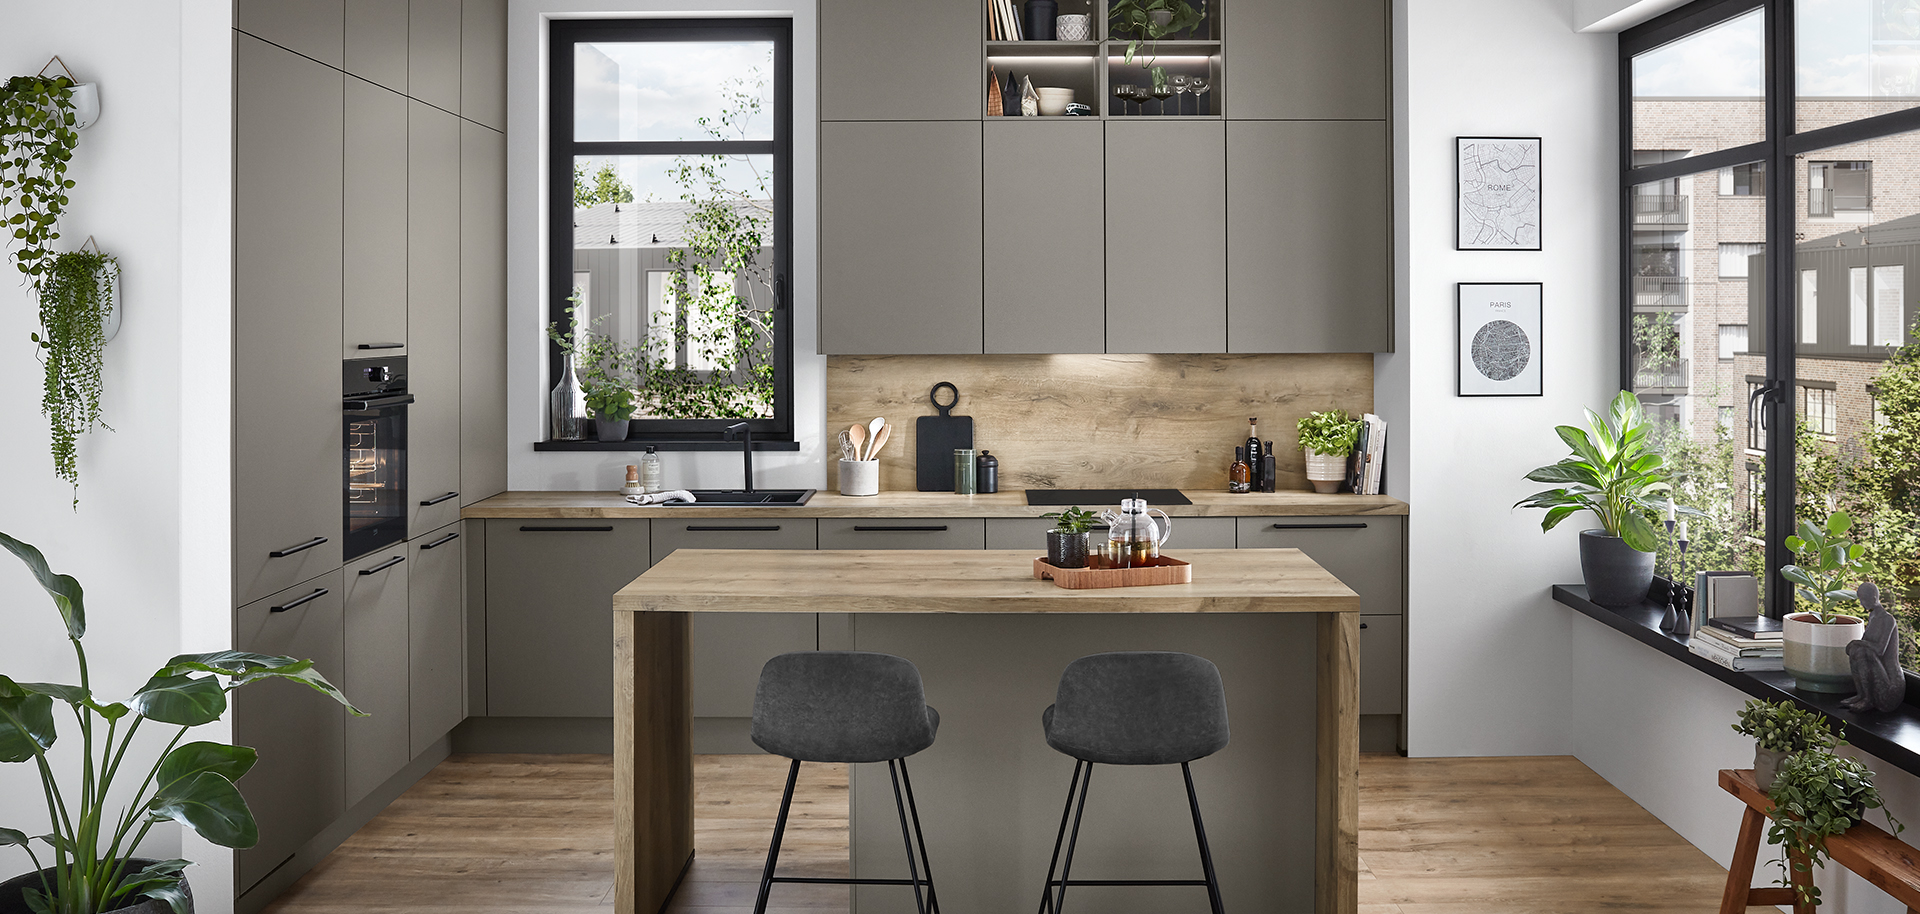 Modern kitchen design featuring sleek gray cabinets, wooden floors, a central island with stools, and natural light complemented by indoor plants.